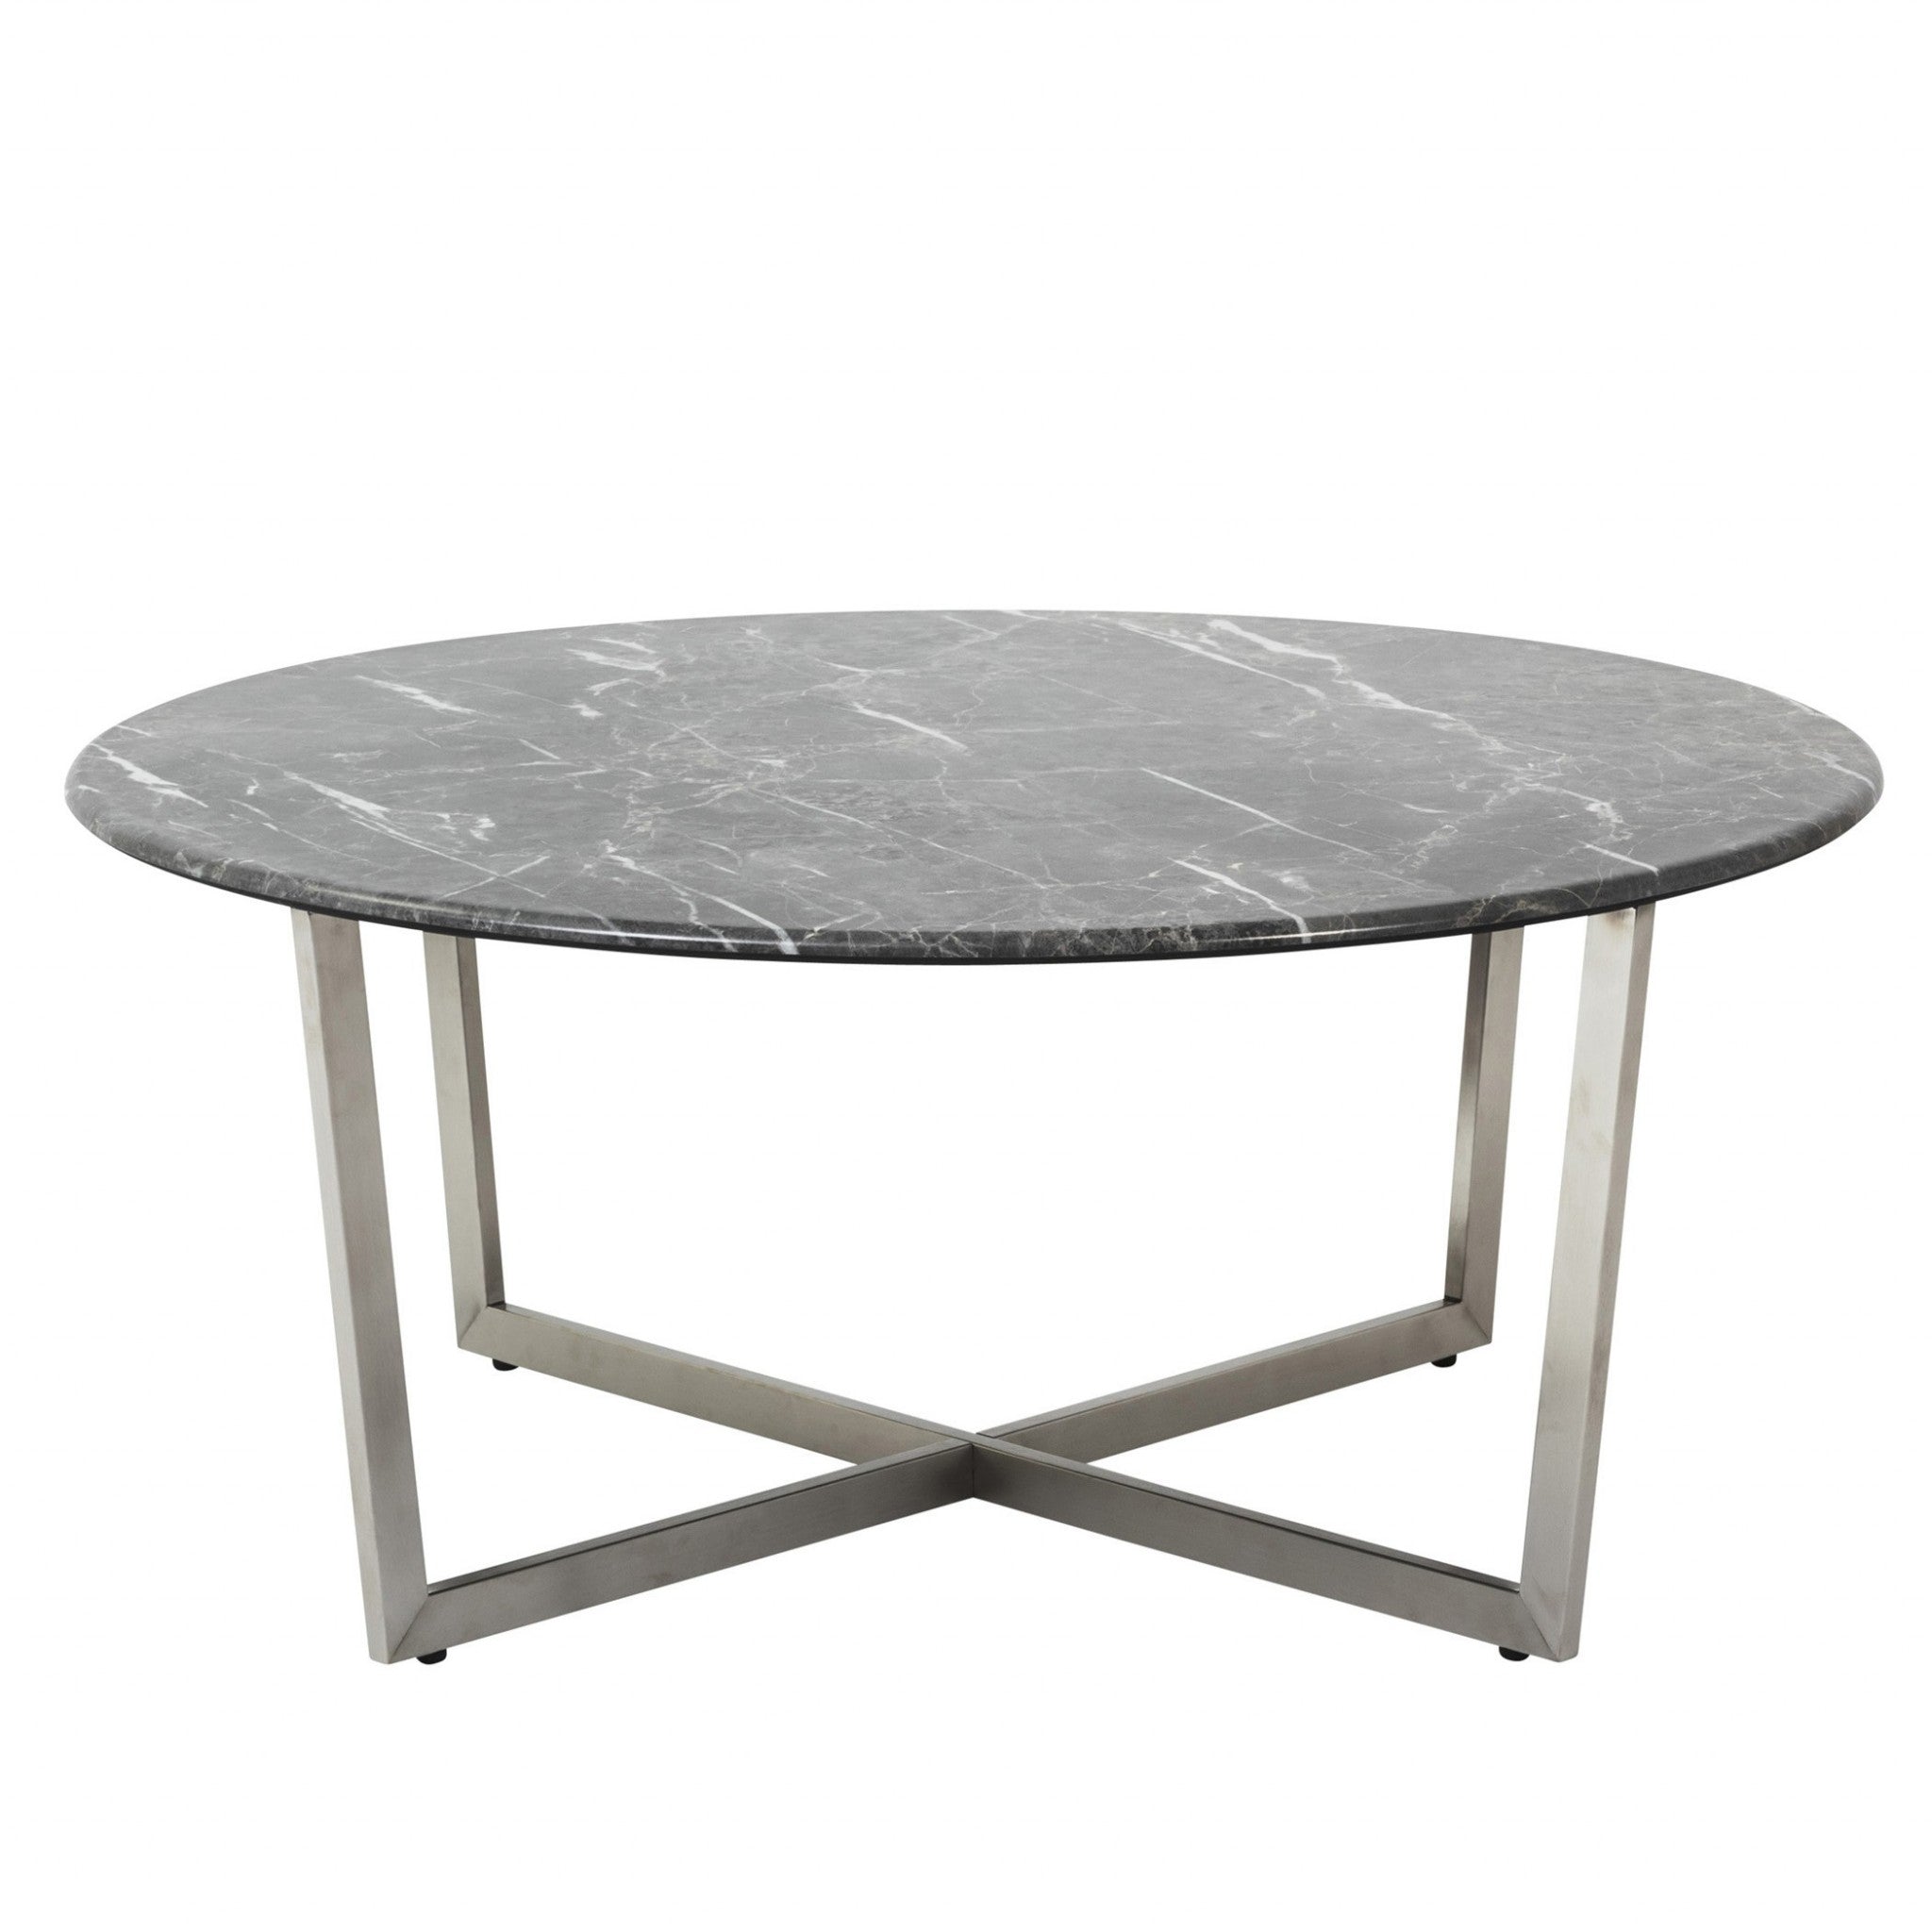 36" Black And Silver Faux Marble Round Coffee Table